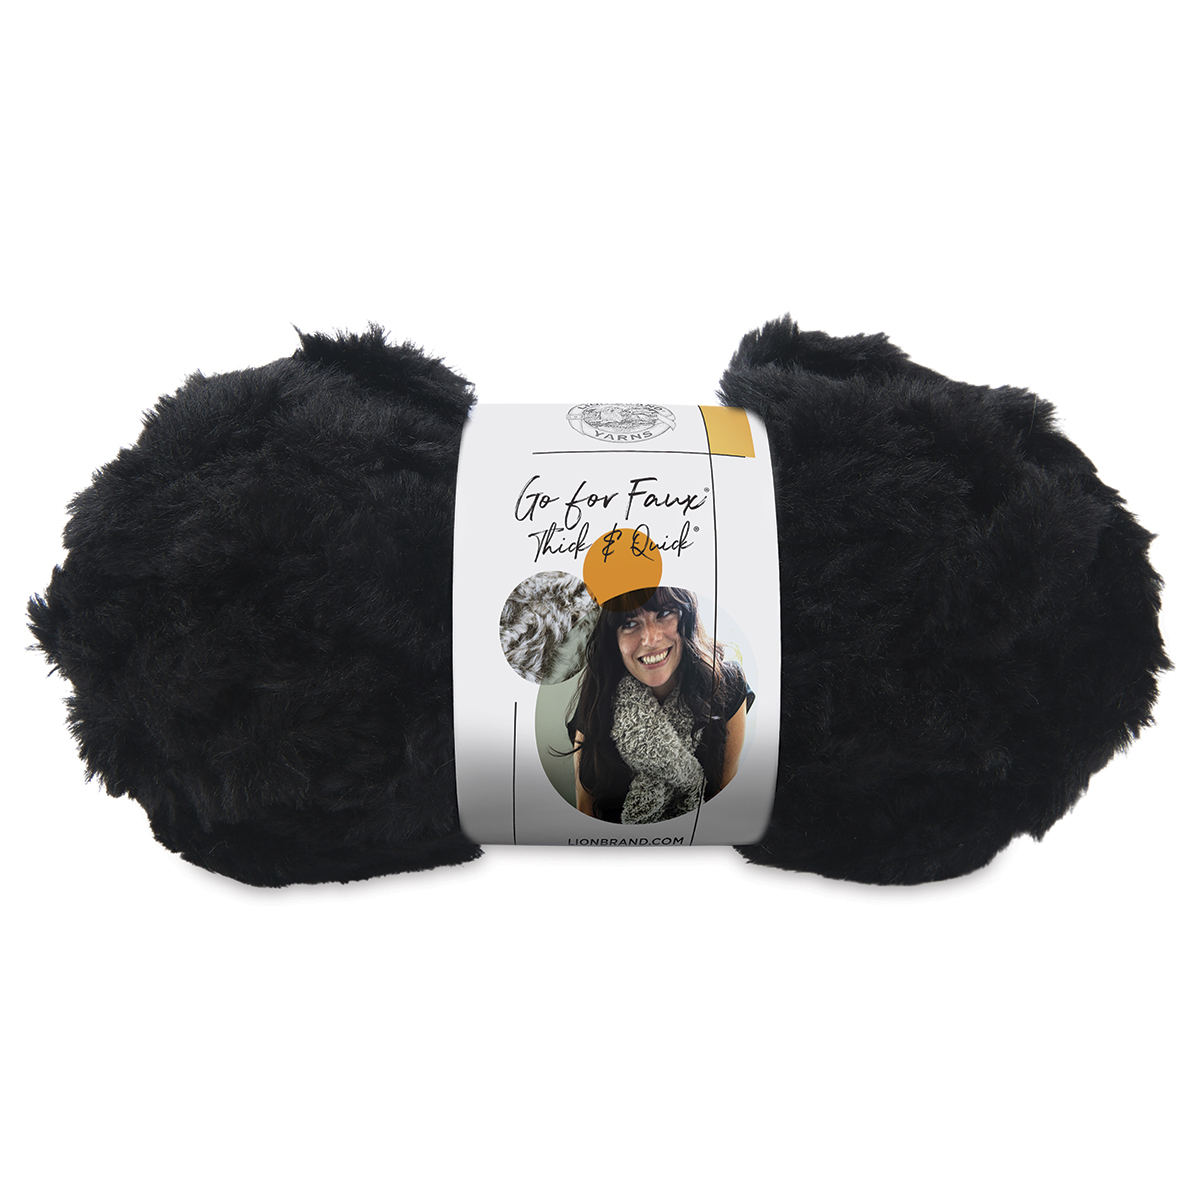 Lion Brand Go For Faux Thick And Quick Yarn - Black Panther, 24 yds